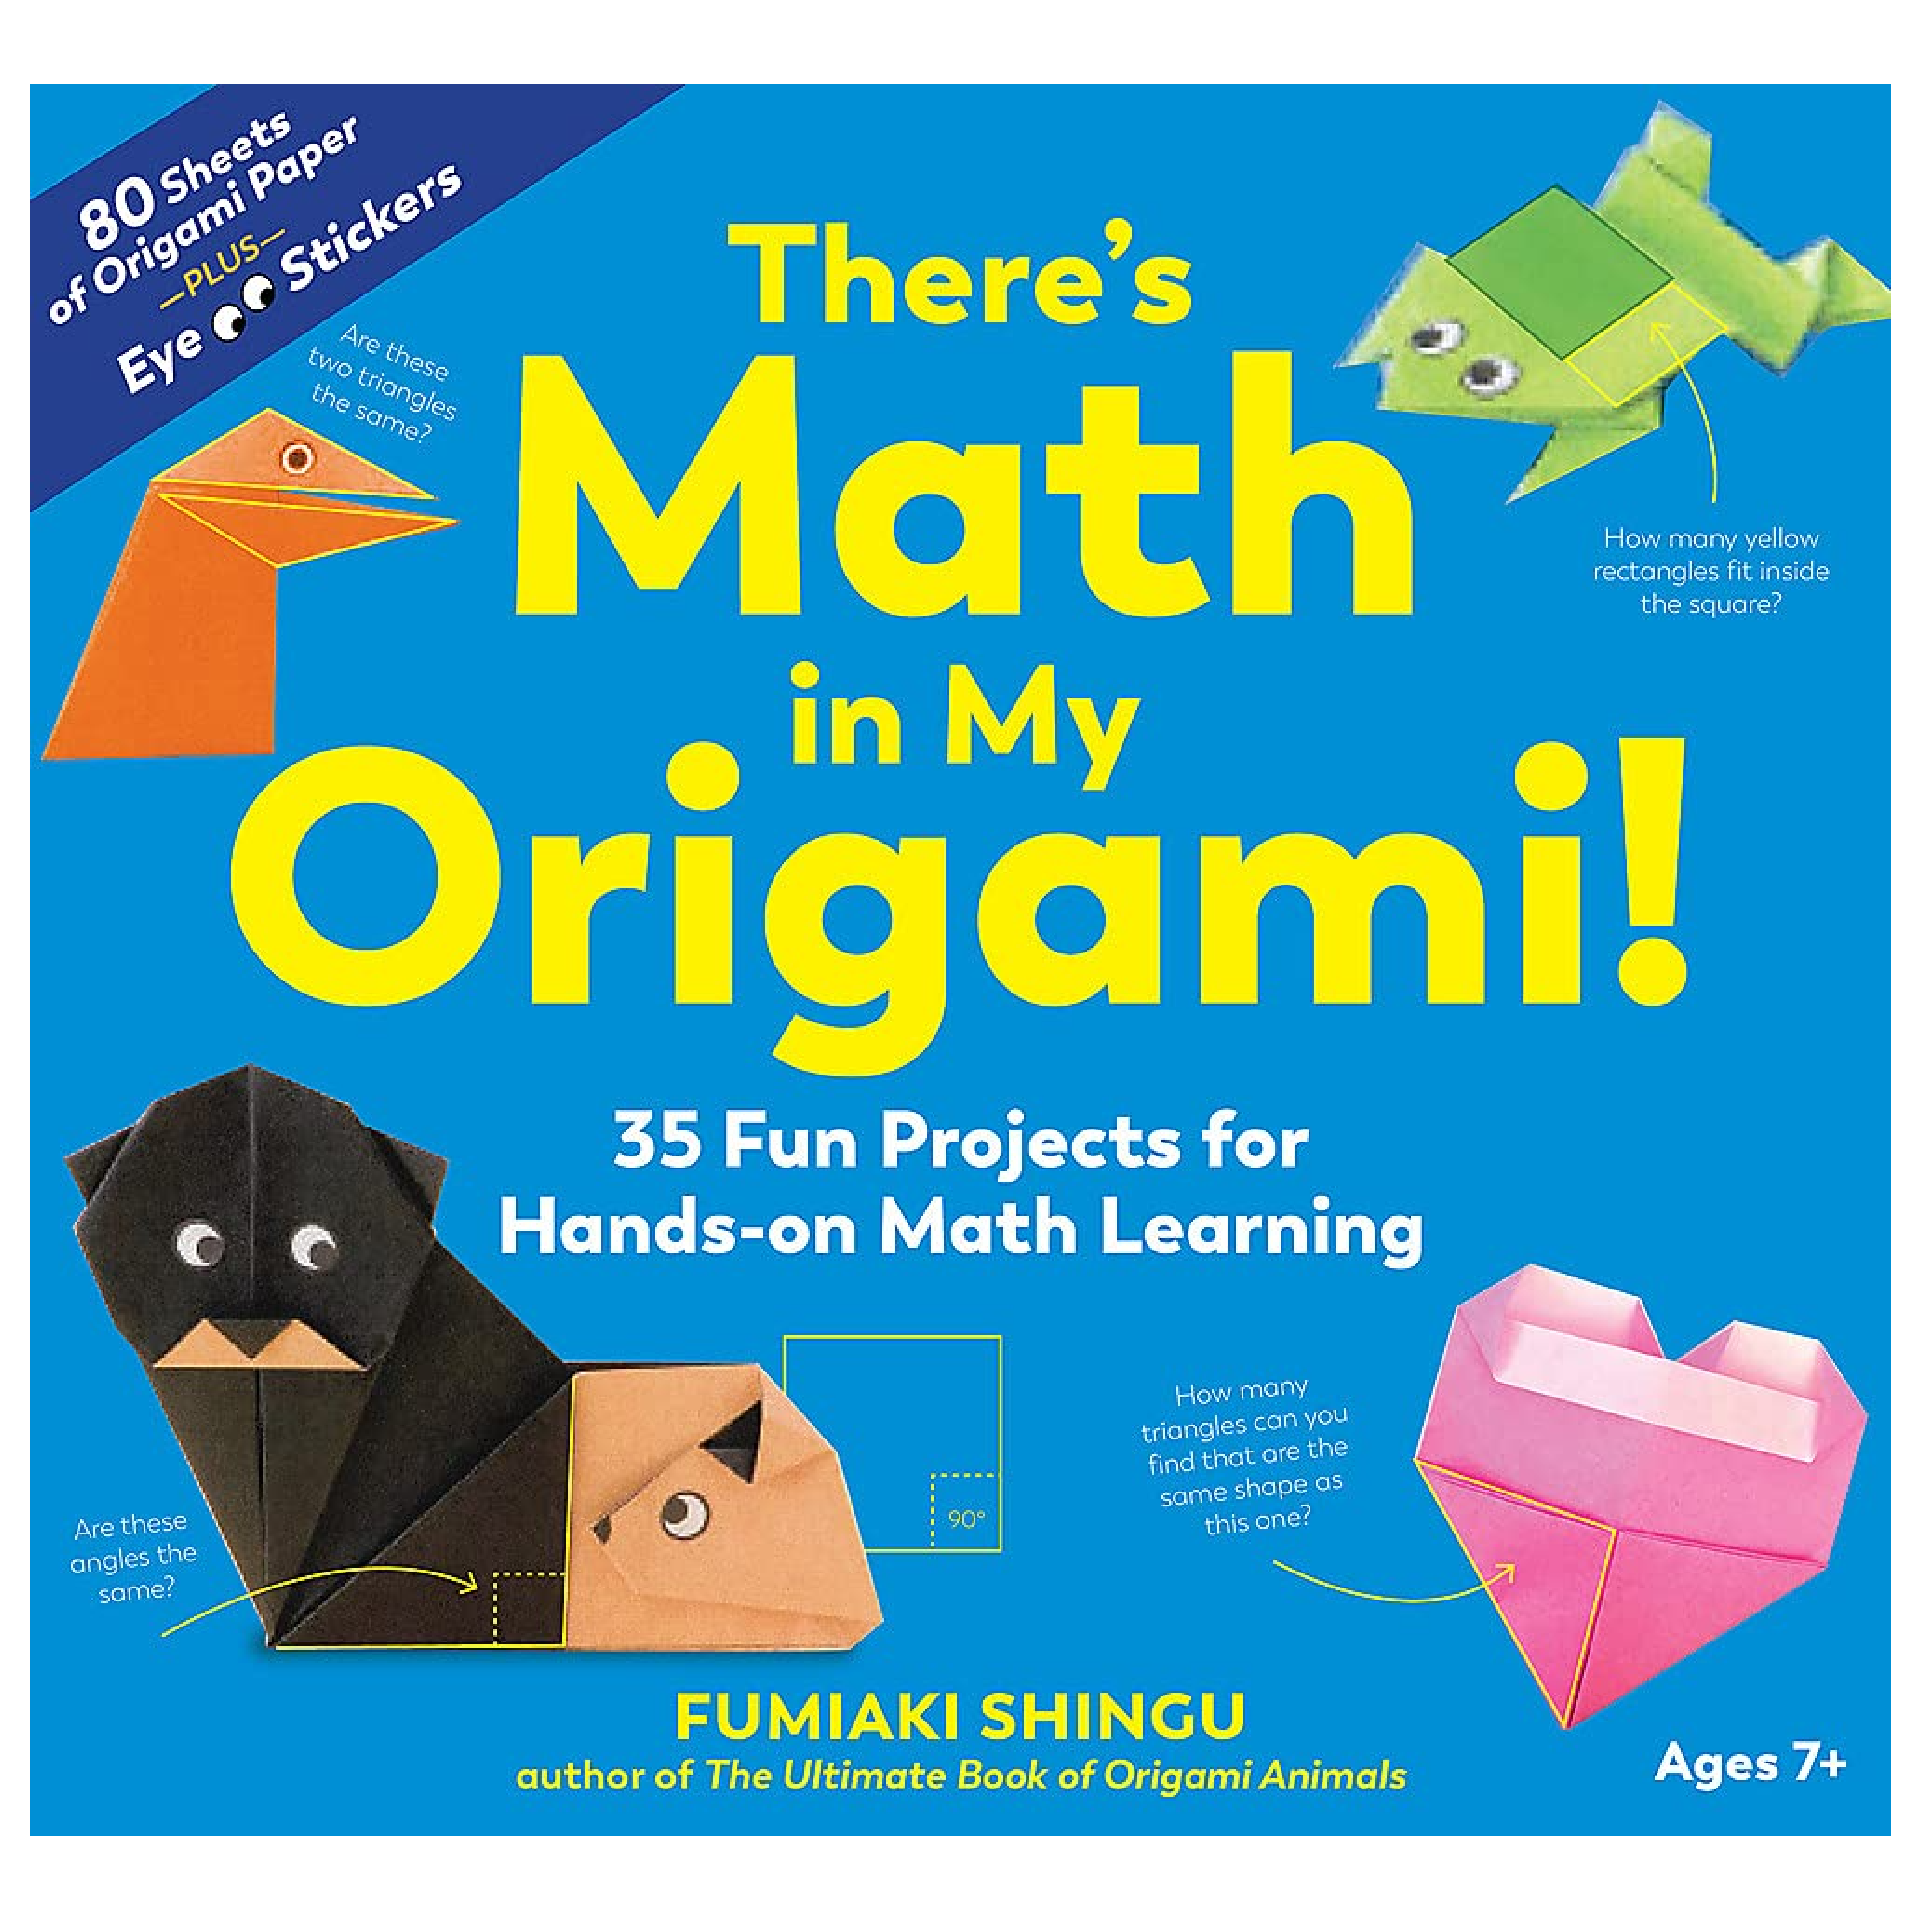 There's Math in My Origami!